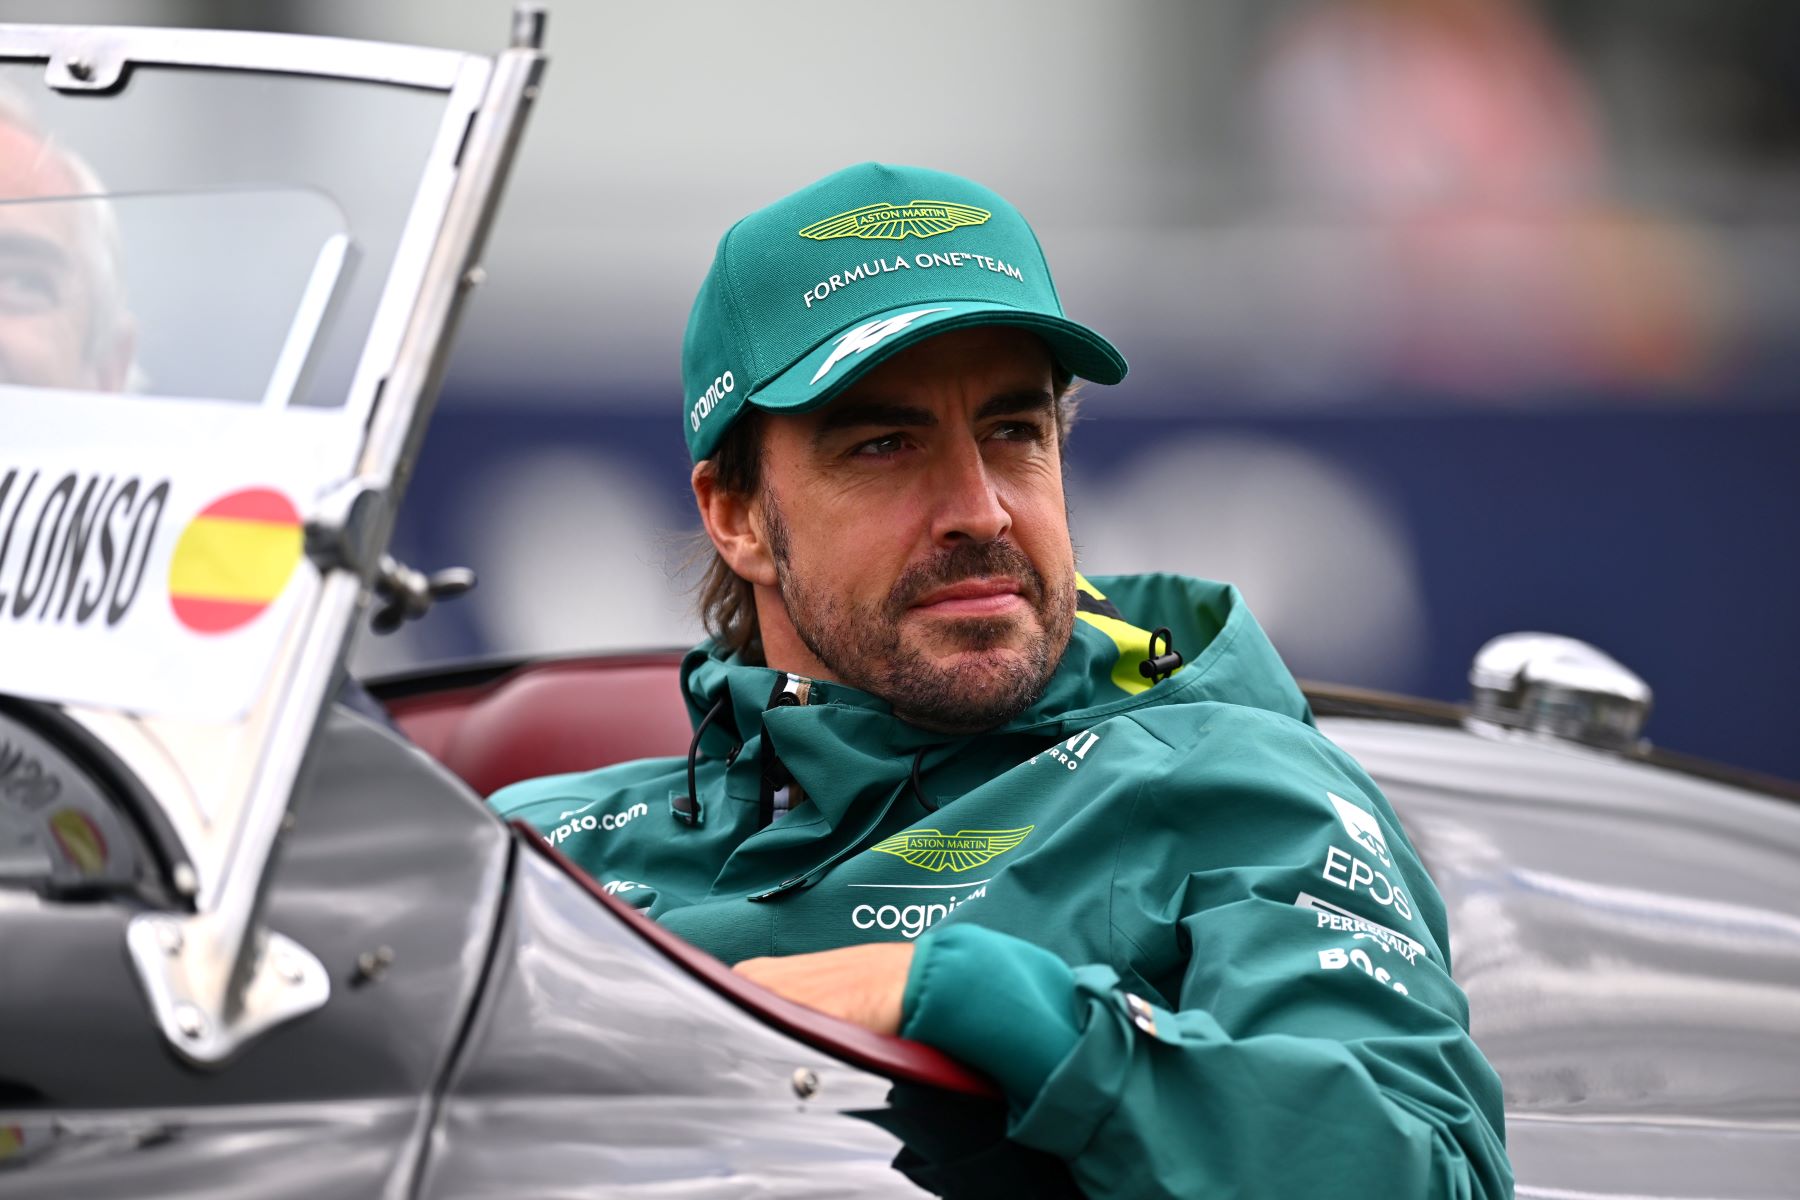 15-extraordinary-facts-about-fernando-alonso